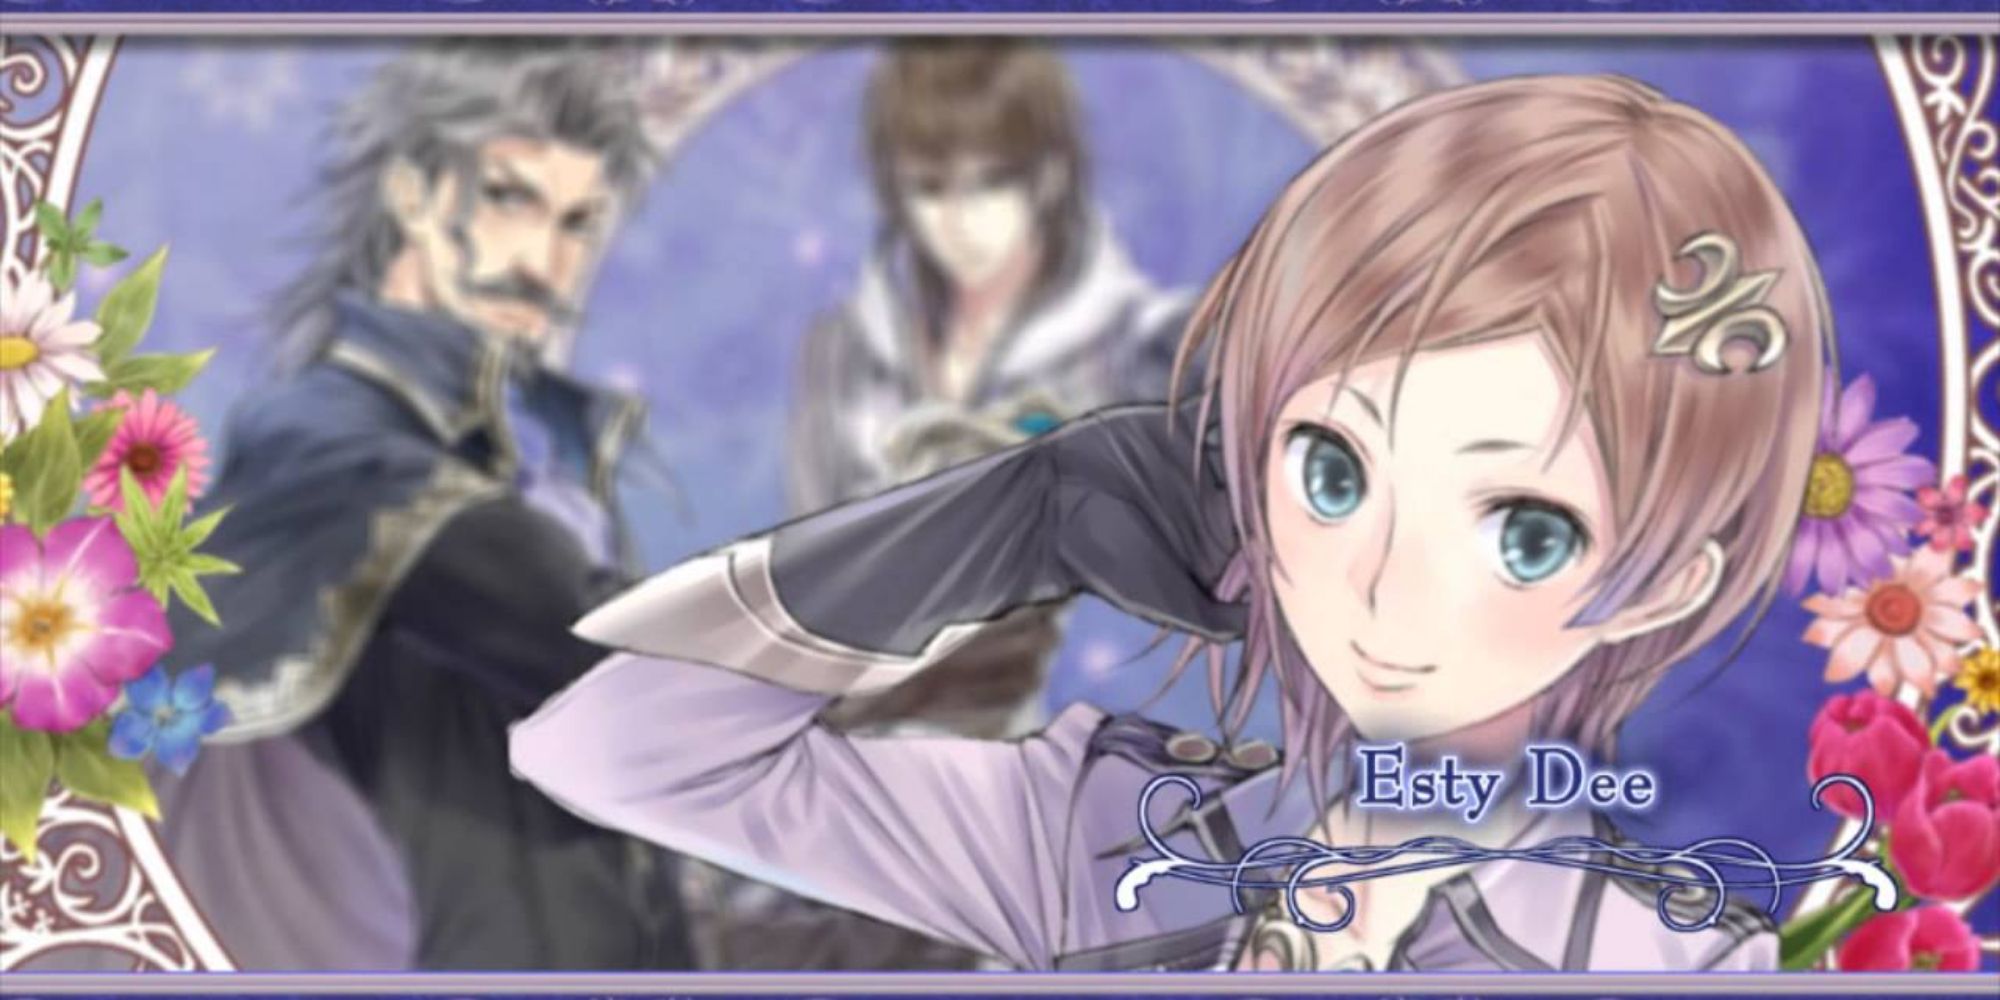 A screenshot of the Atelier character Esty Dee, who appears in the Arland trilogy